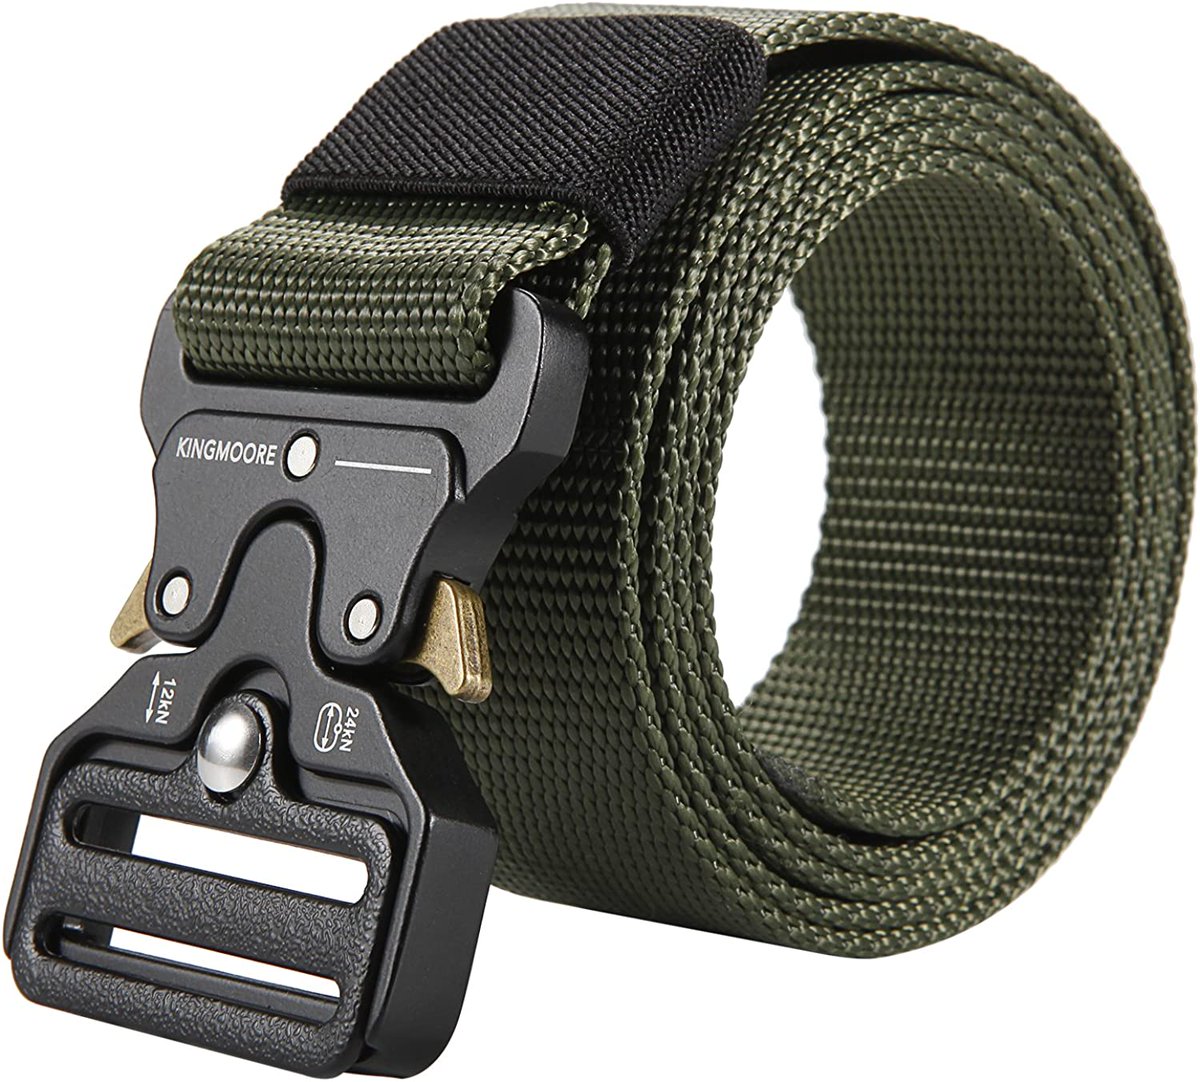 Looking for a durable and stylish tactical belt? Check out KingMoore Men's Tactical Belt! With its adjustable fit and heavy-duty buckle, you can trust this belt to keep your pants in place during any mission or adventure. #tacticalgear #belt #tacticalbelt